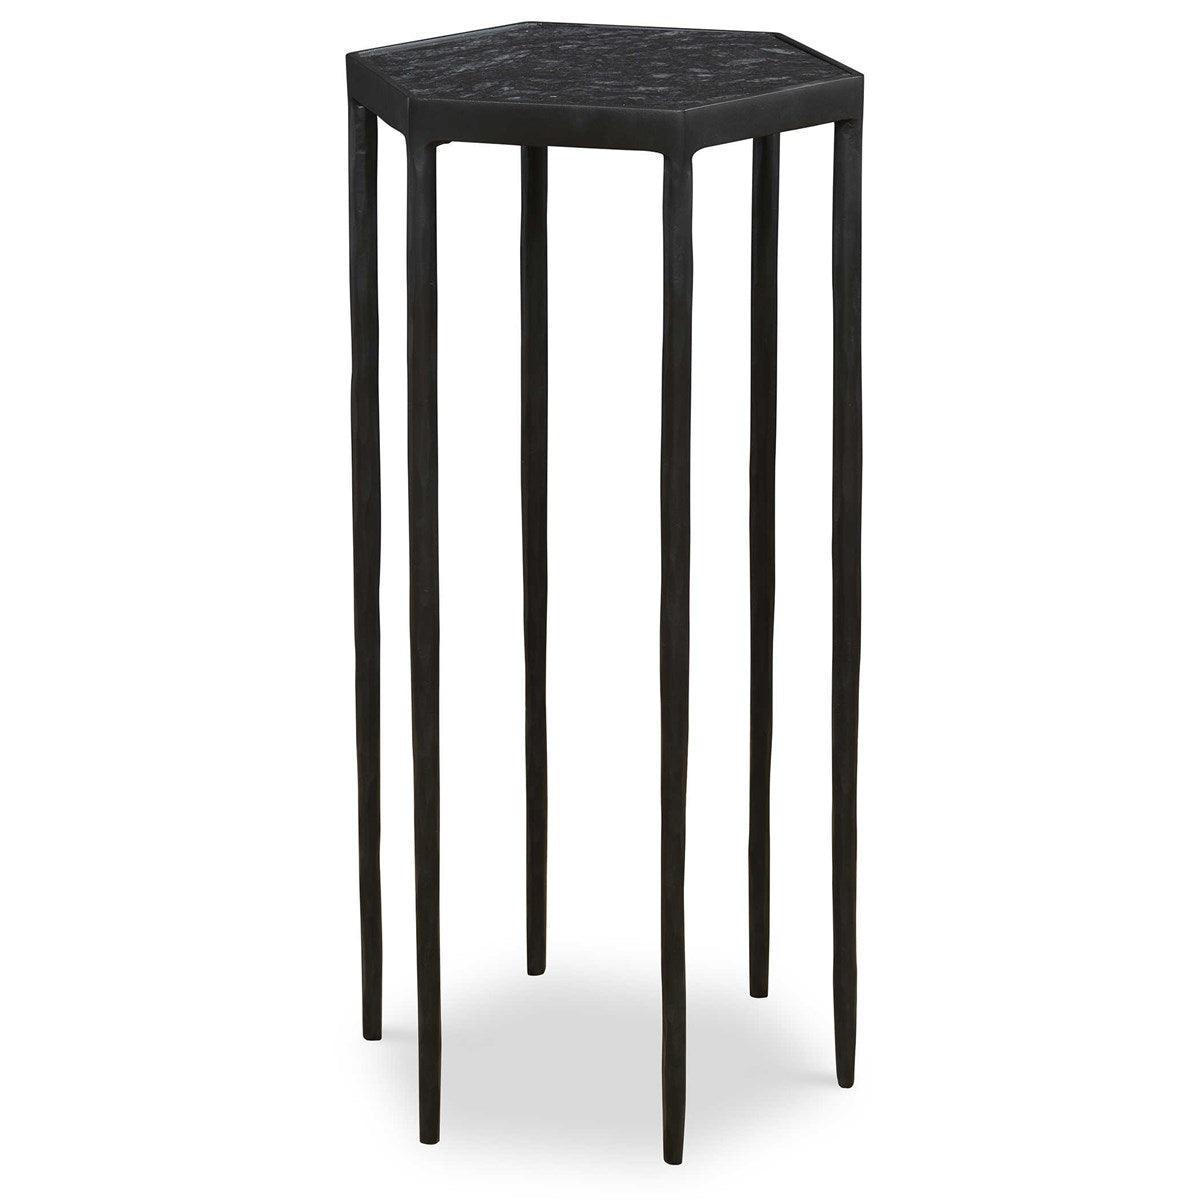 The Uttermost - Aviary Accent Table - 25881 | Montreal Lighting & Hardware